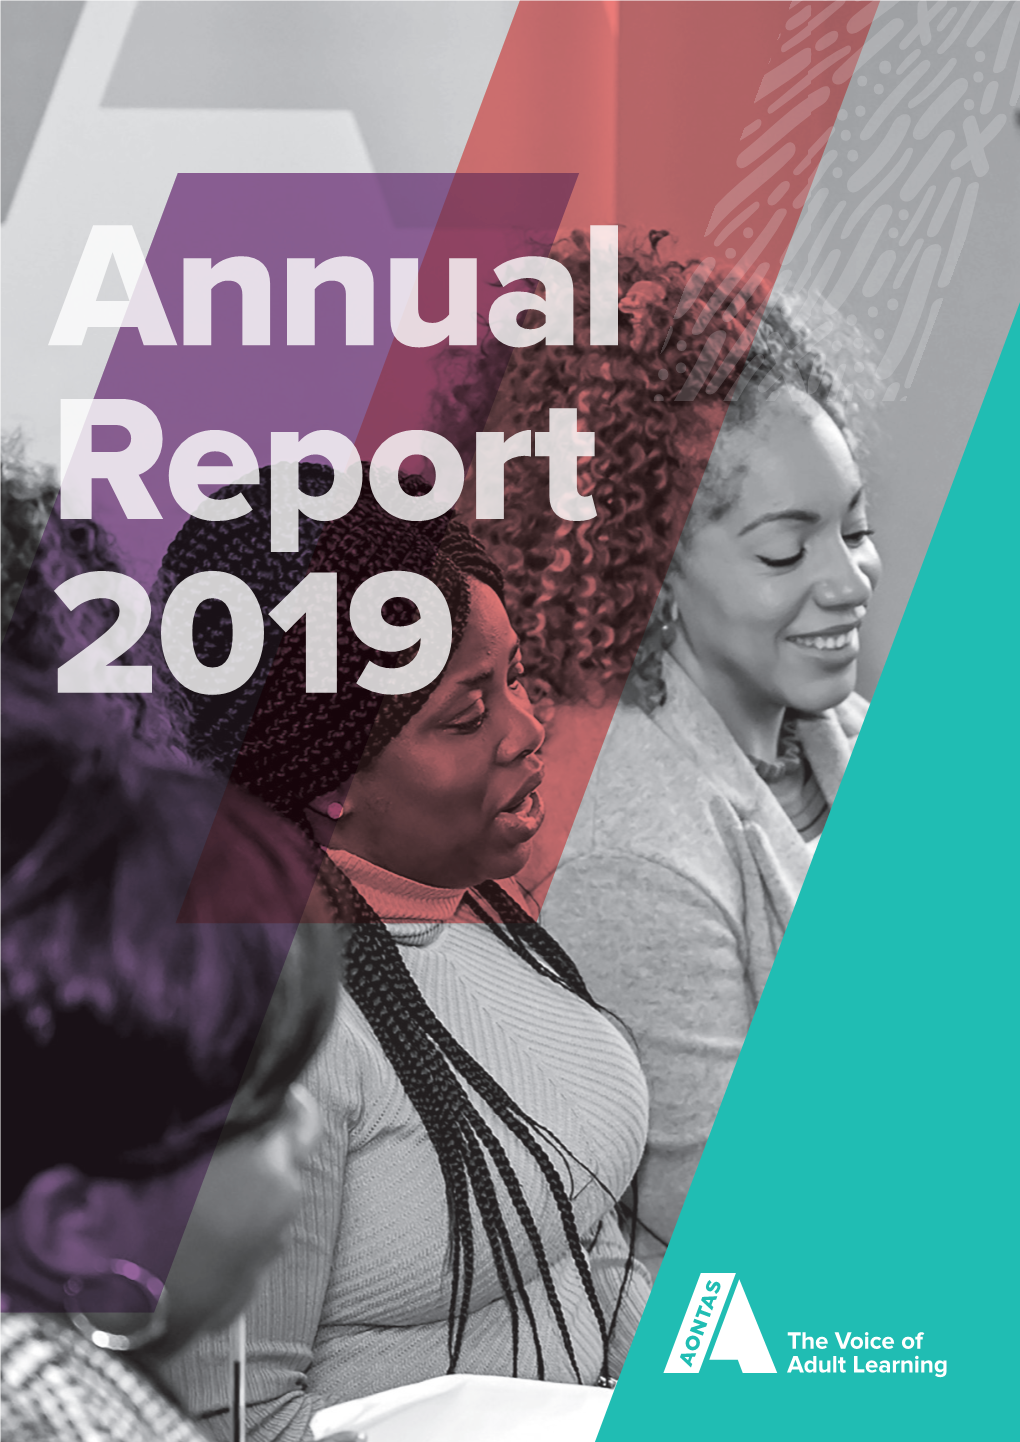 AONTAS Annual Report 2019 Contents